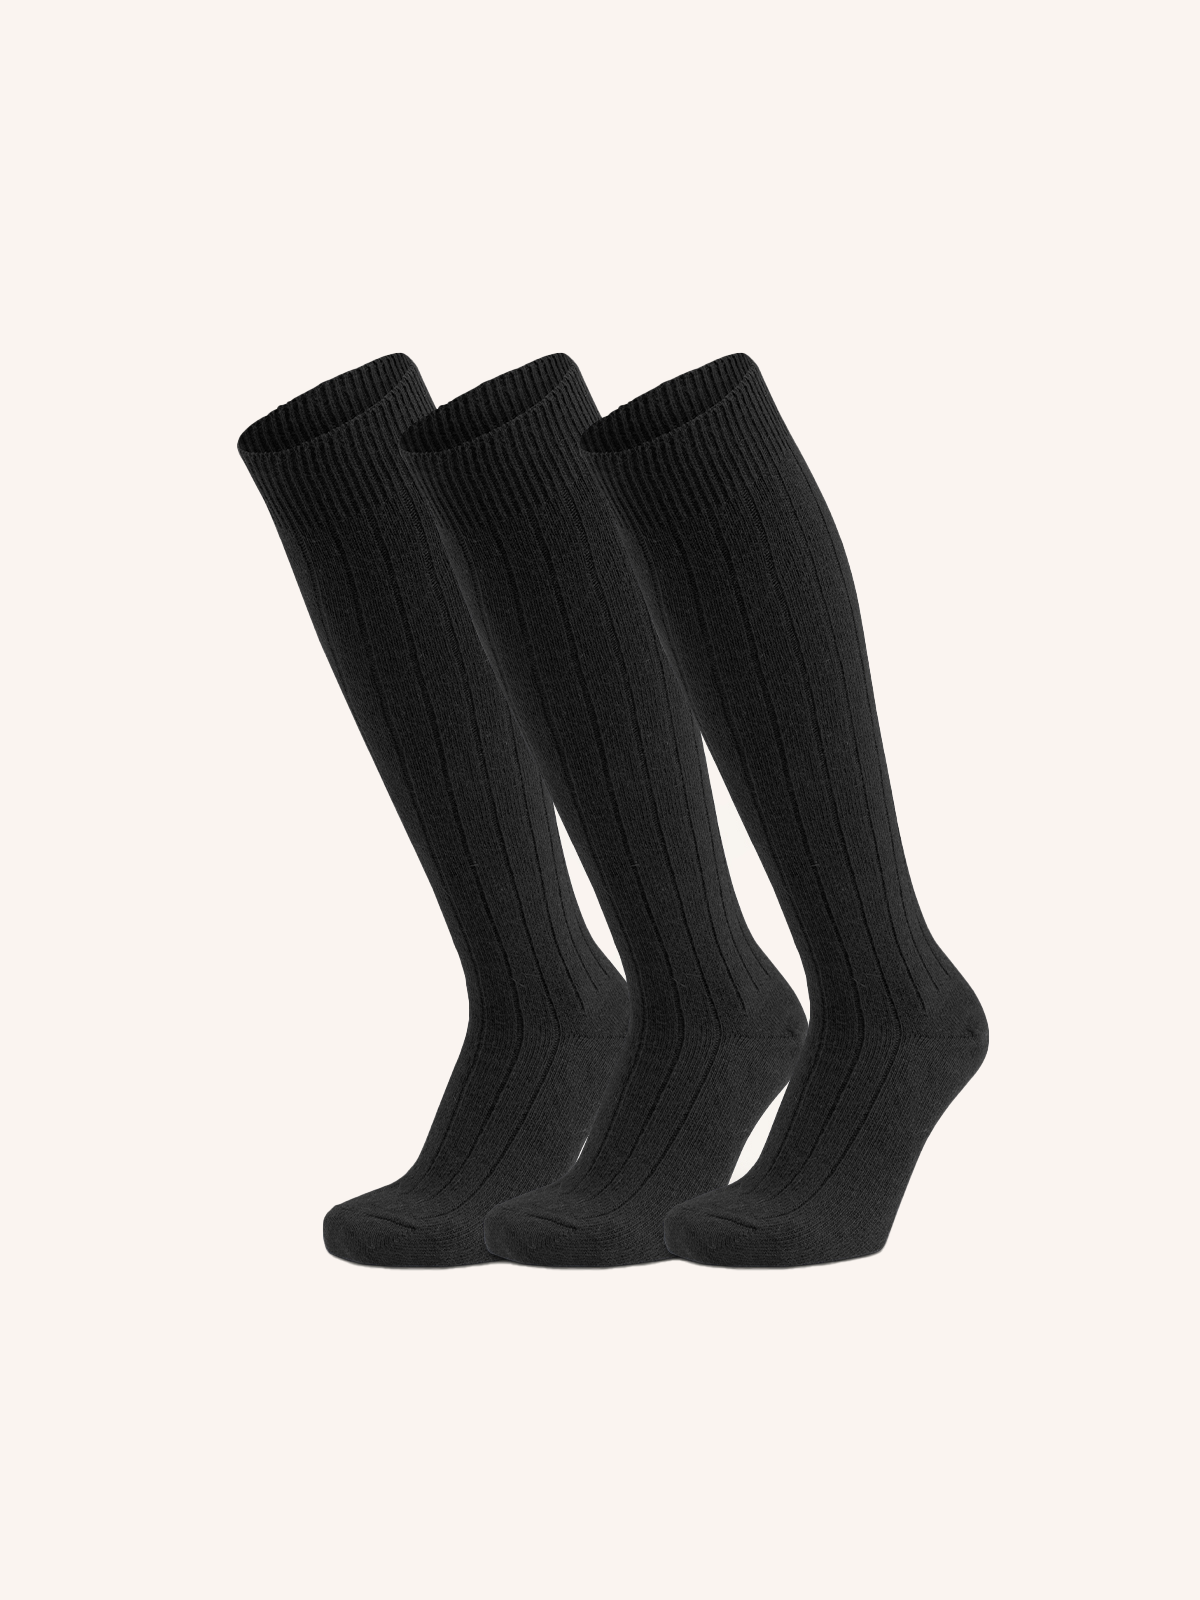 Long Socks in Angora, Cotton and Viscose for Women | Plain Color | Pack of 3 Pairs | Angor